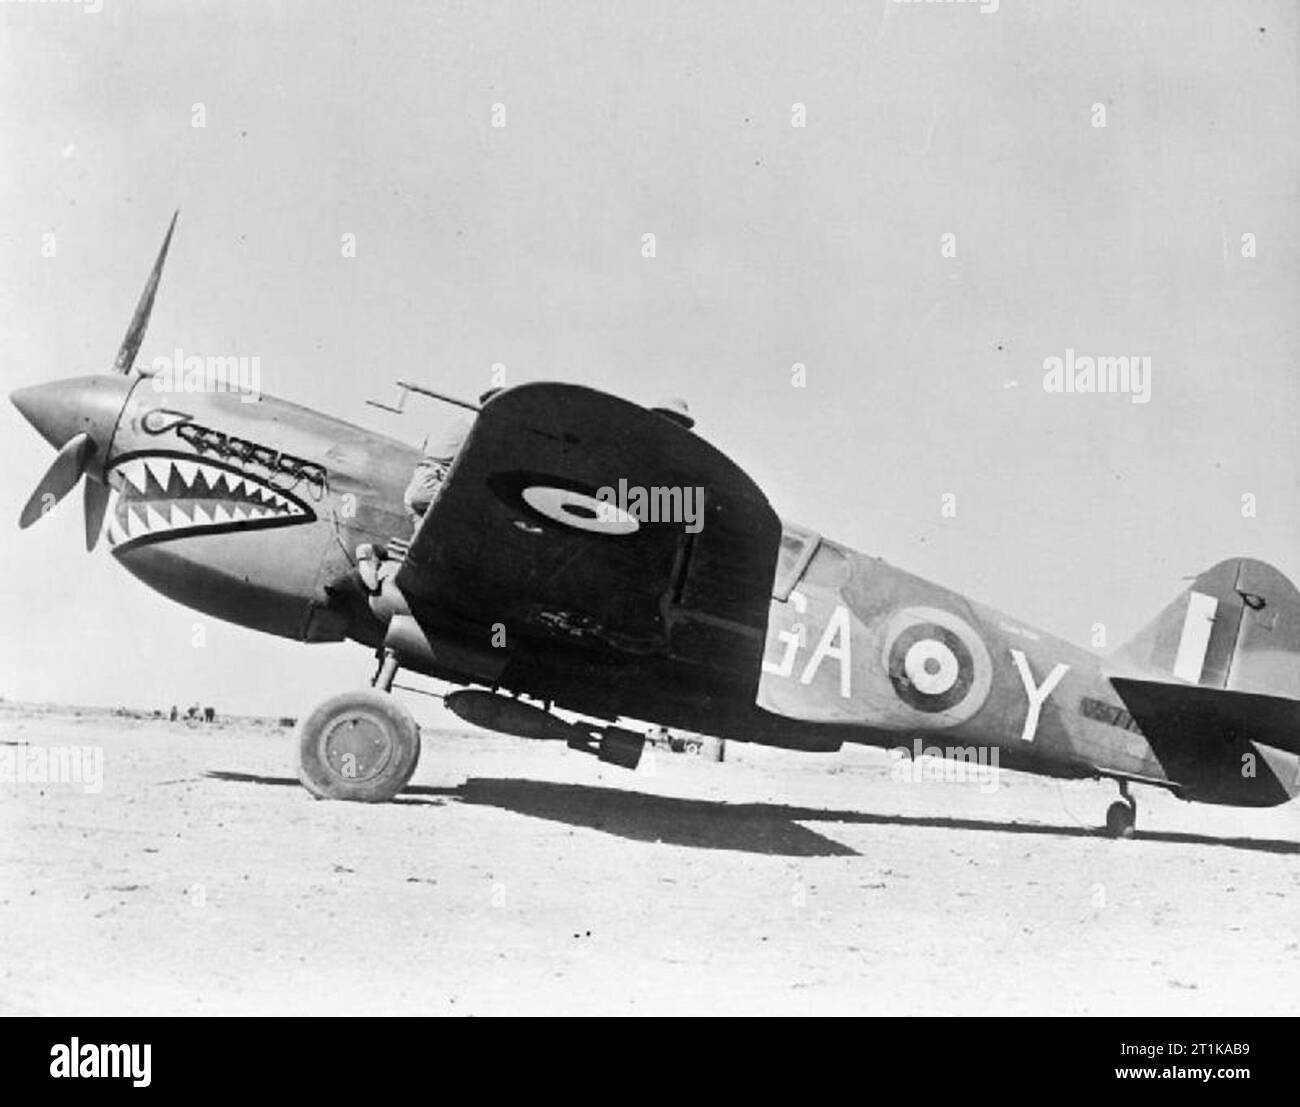 Royal Air Force Operations in the Middle East and North Africa, 1939-1943 Curtiss Kittyhawk Mark I, AK772 'GA-Y' 'London Pride', of No. 112 Squadron RAF is prepared for a sortie at Gambut Main, Libya. The ground crew can just be seen assisting the pilot to strap himself into the cockpit. The aircraft is carrying a 250-lb GP Bomb, fitted with a surface-burst impact fuse, under the fuselage. Note also the plugs placed in the exhaust stubs to keep the desert sand out. AK772 was lost on a ground attack mission near Bir Hacheim on 30 May 1942; its Australian pilot, Pilot Officer H G Burney, was kil Stock Photo